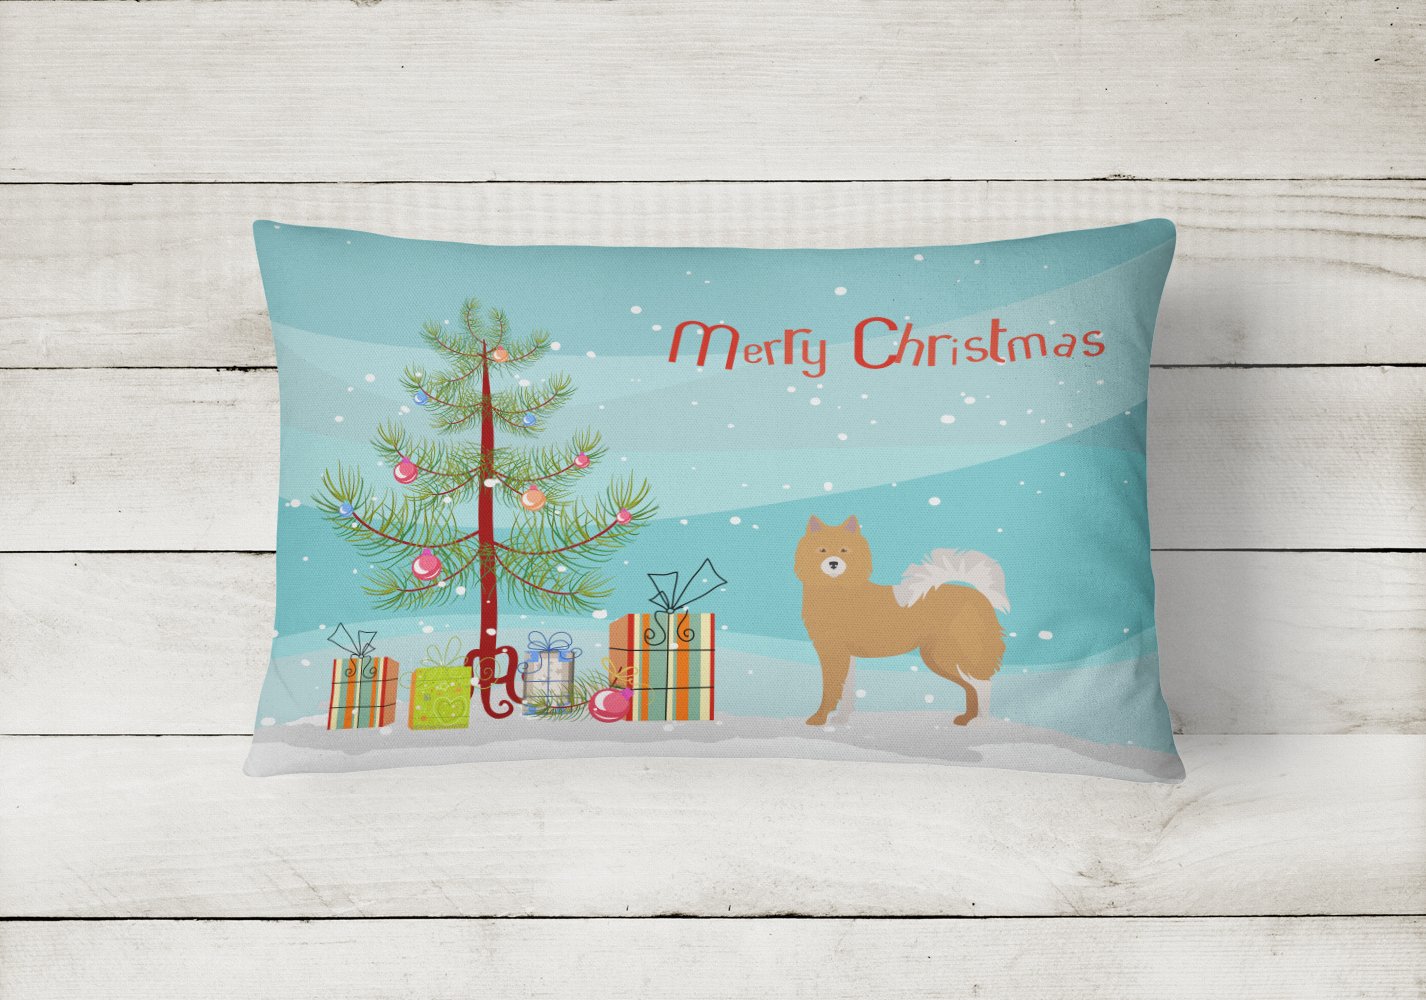 Brown & White Elo dog Christmas Tree Canvas Fabric Decorative Pillow CK3451PW1216 by Caroline's Treasures